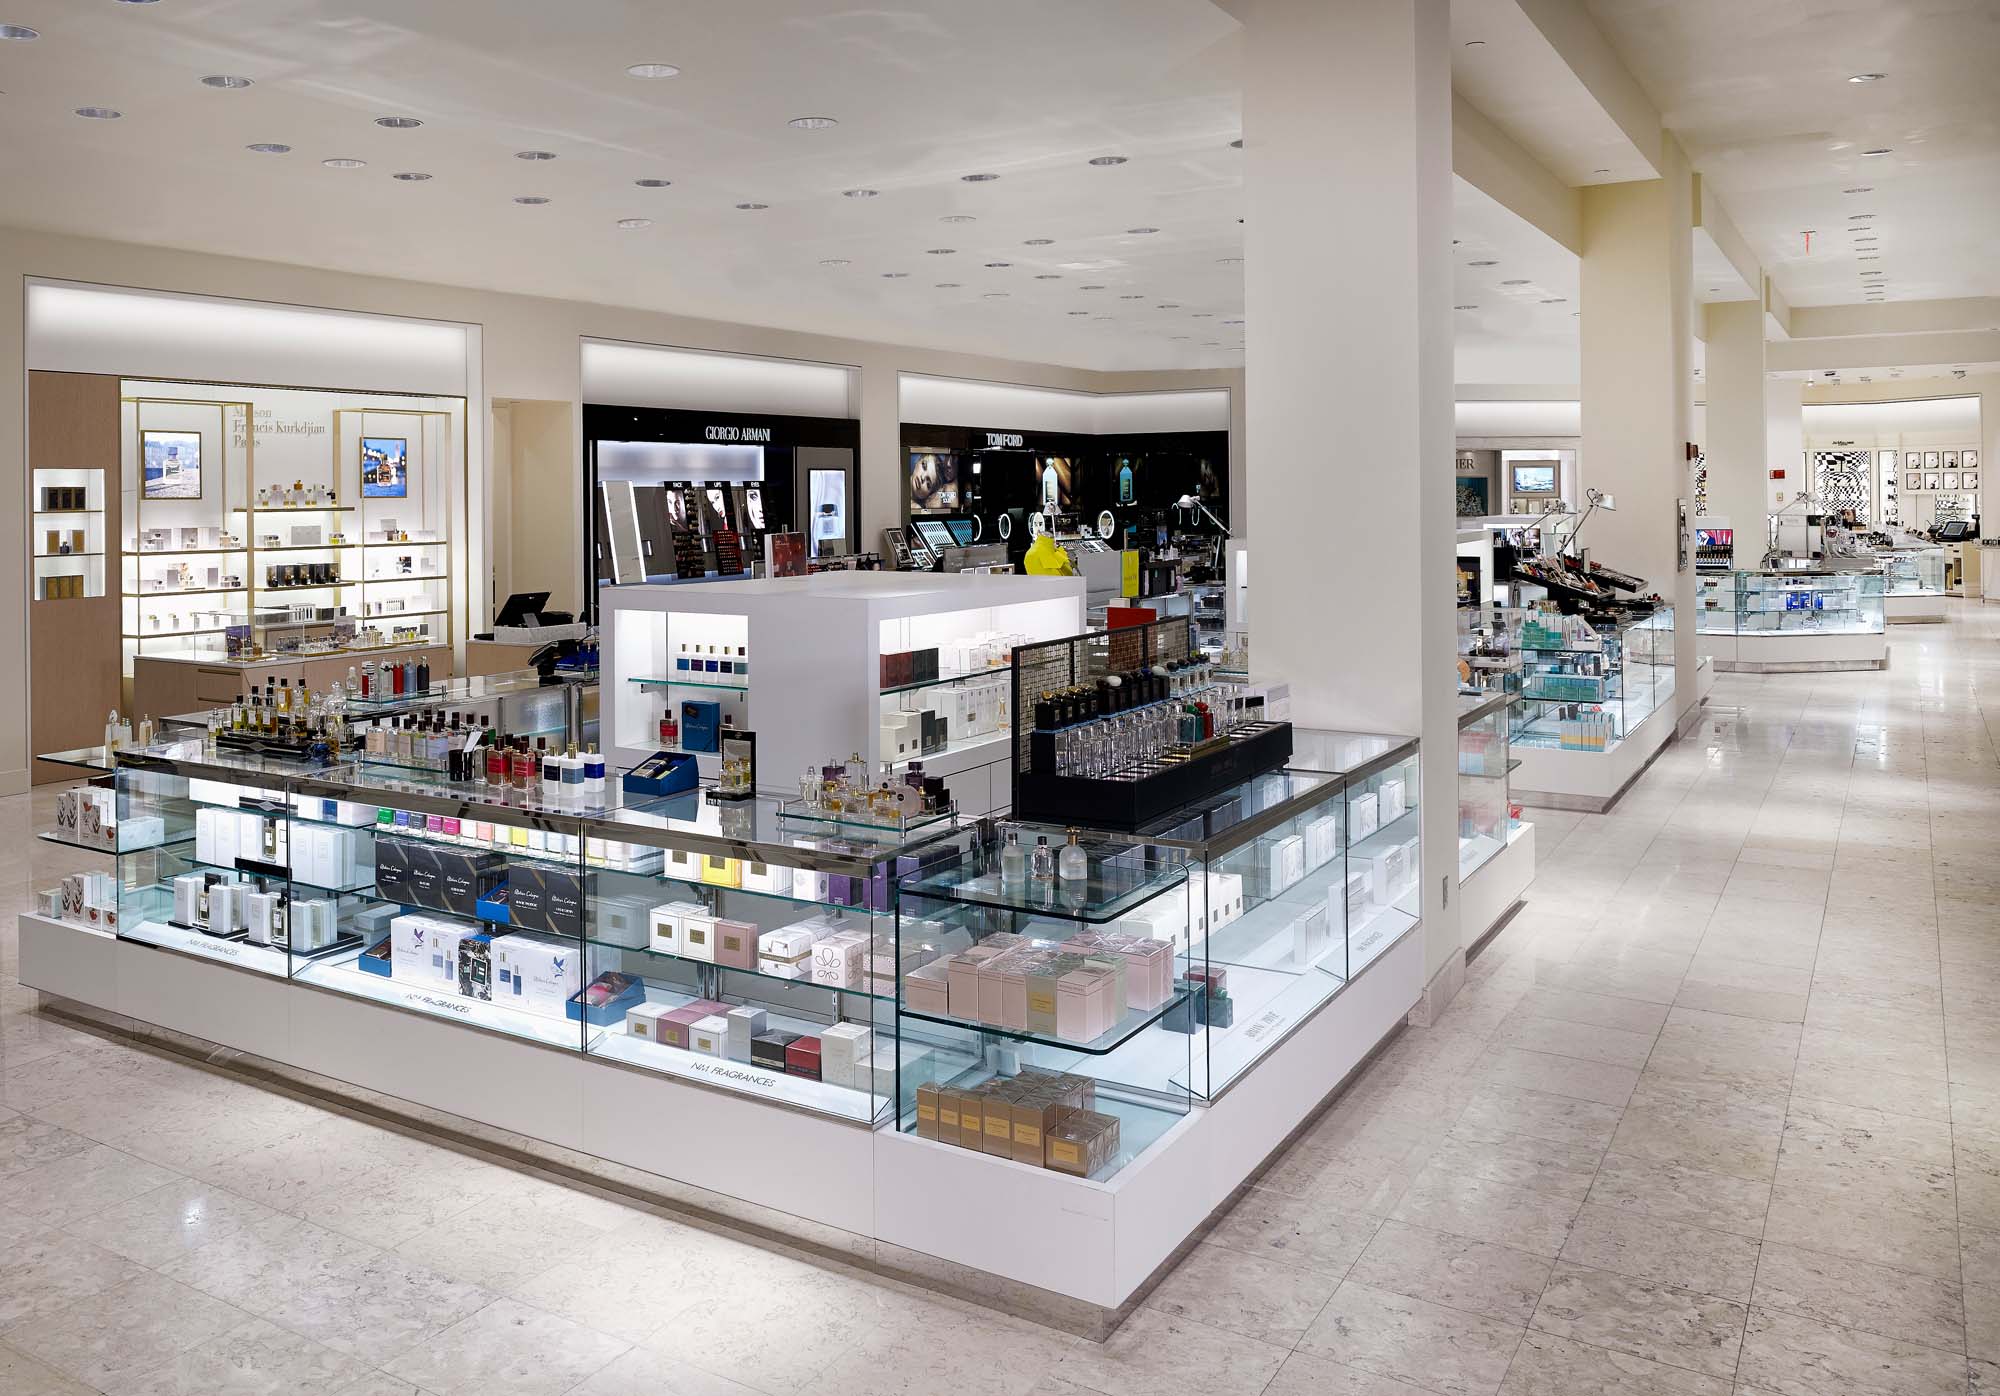 Creating a Neiman Marcus experience